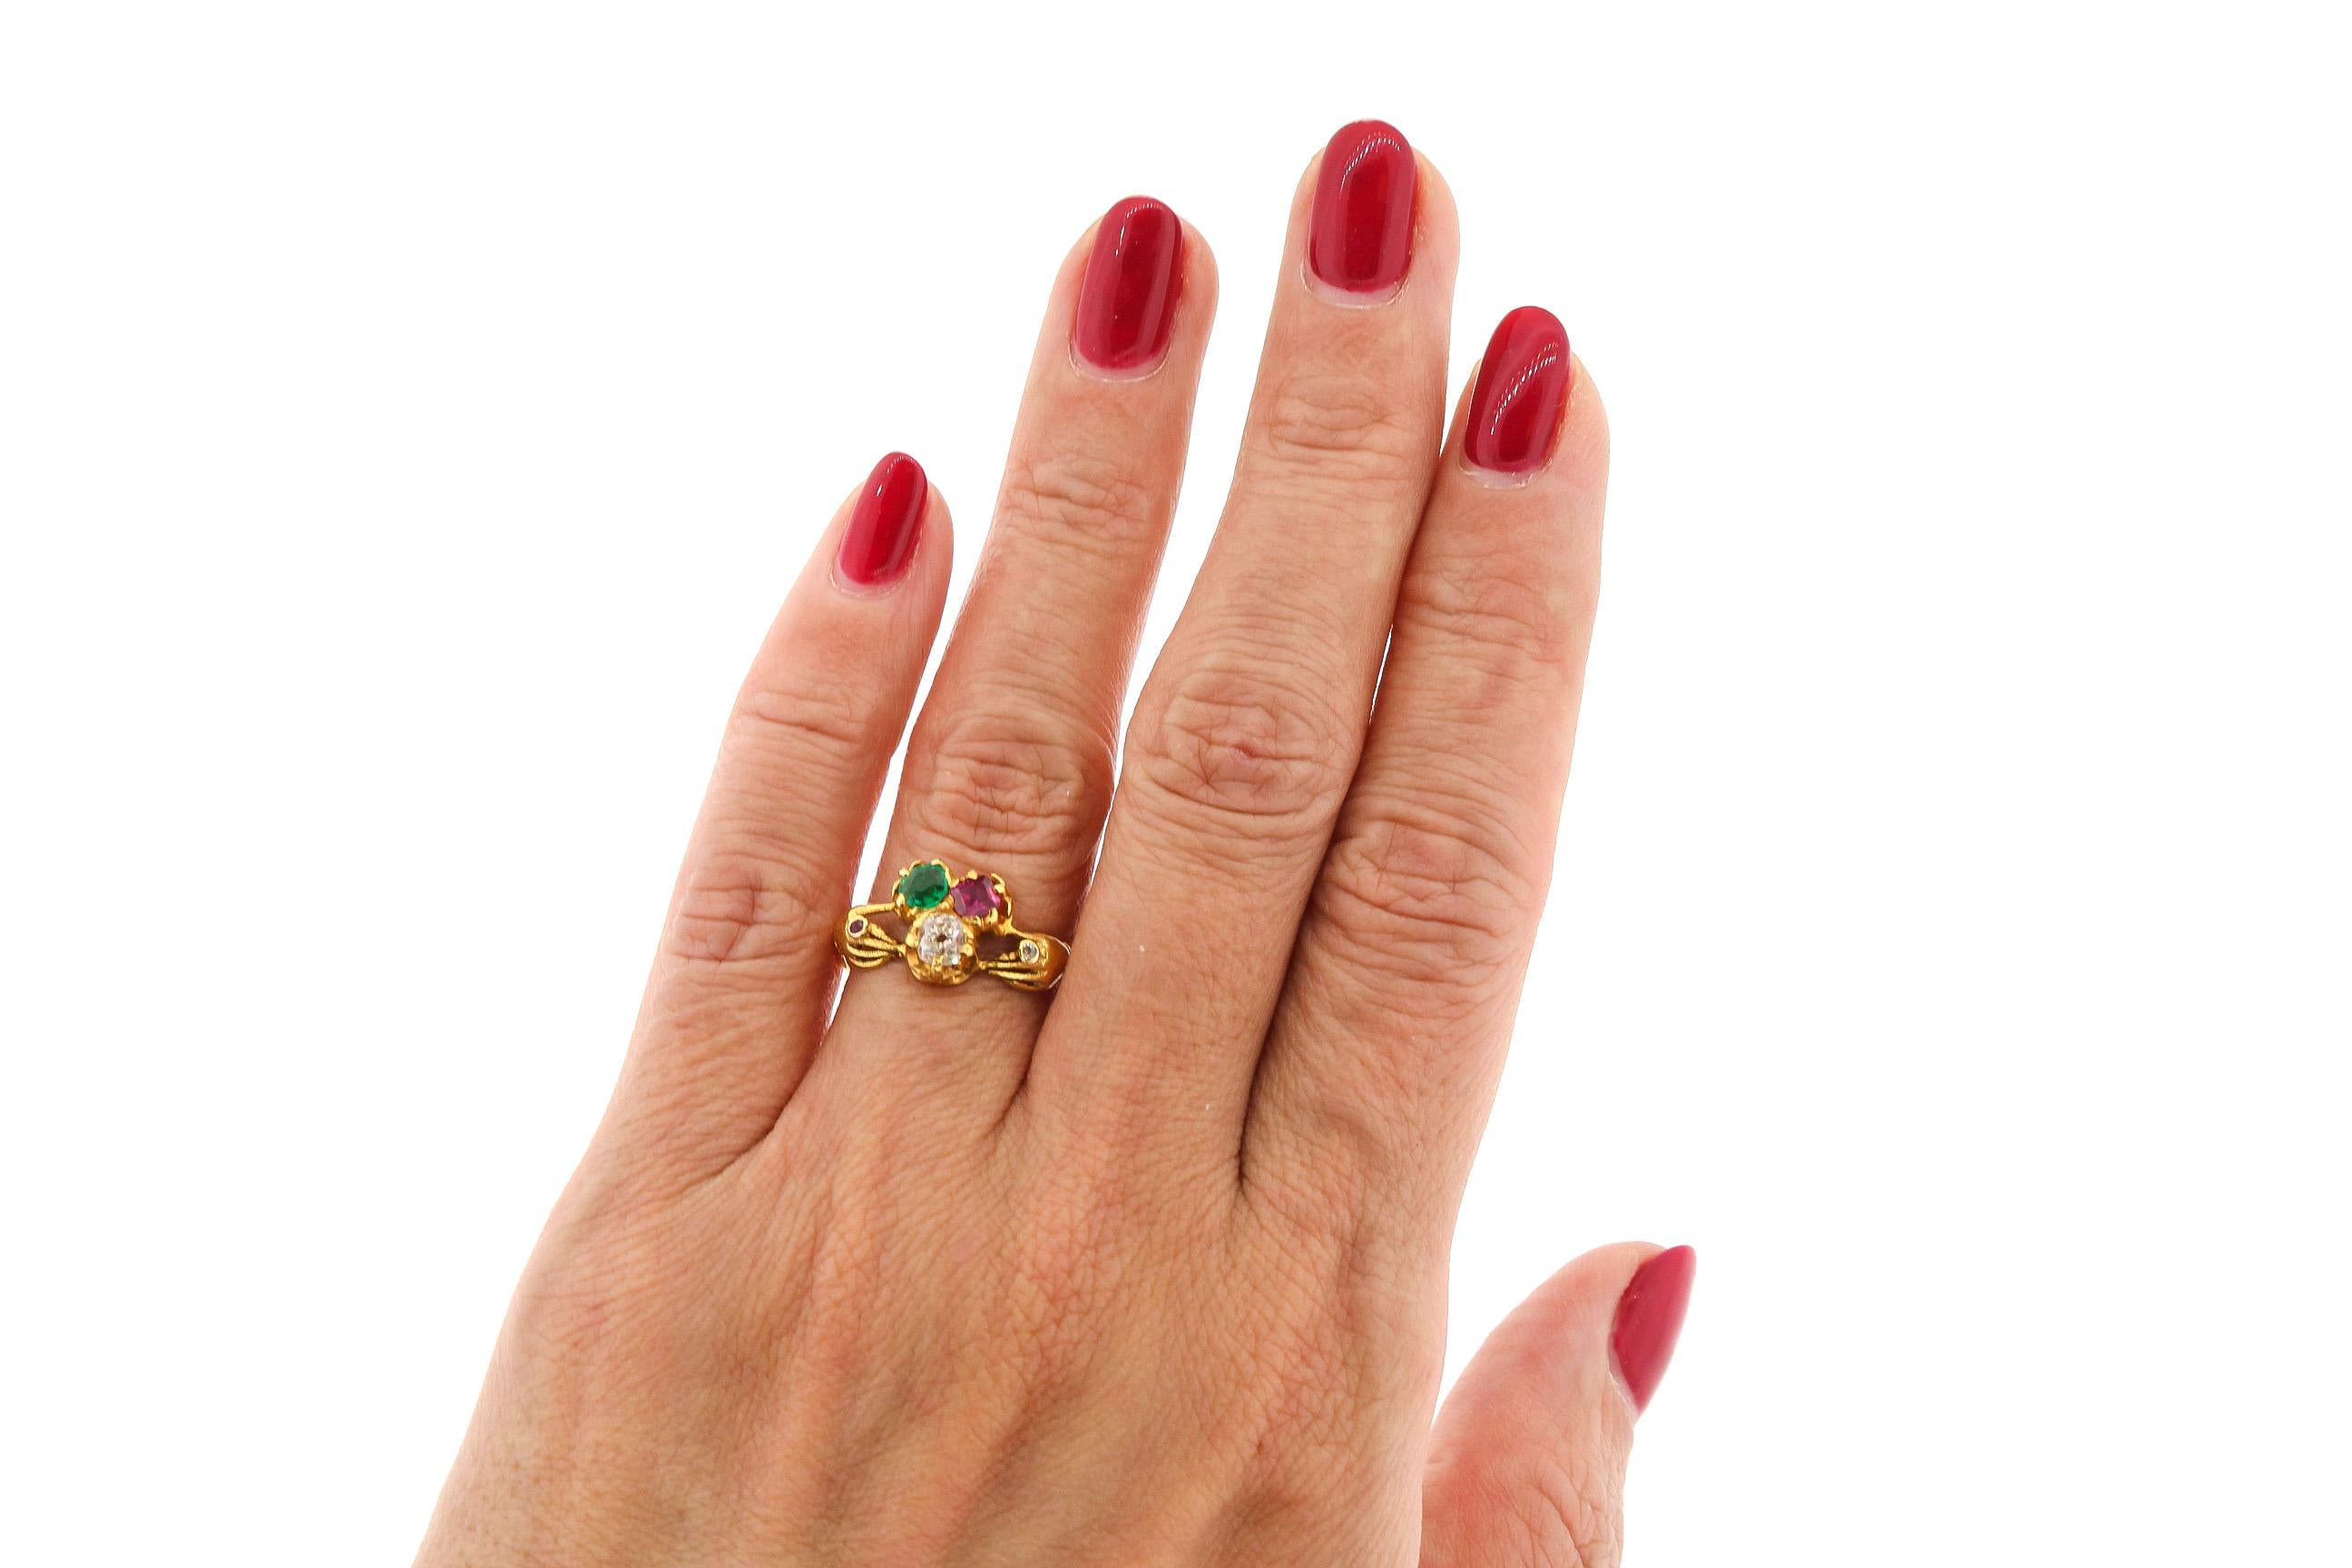 Antique 19th Century Victorian Fede ring featuring a trio of a ruby, diamond and an emerald. A Fede ring is a name for a ring featuring clasped hands symbolizing love, friendship or betrothal. Such a design goes back to Roman times. The Irish calls